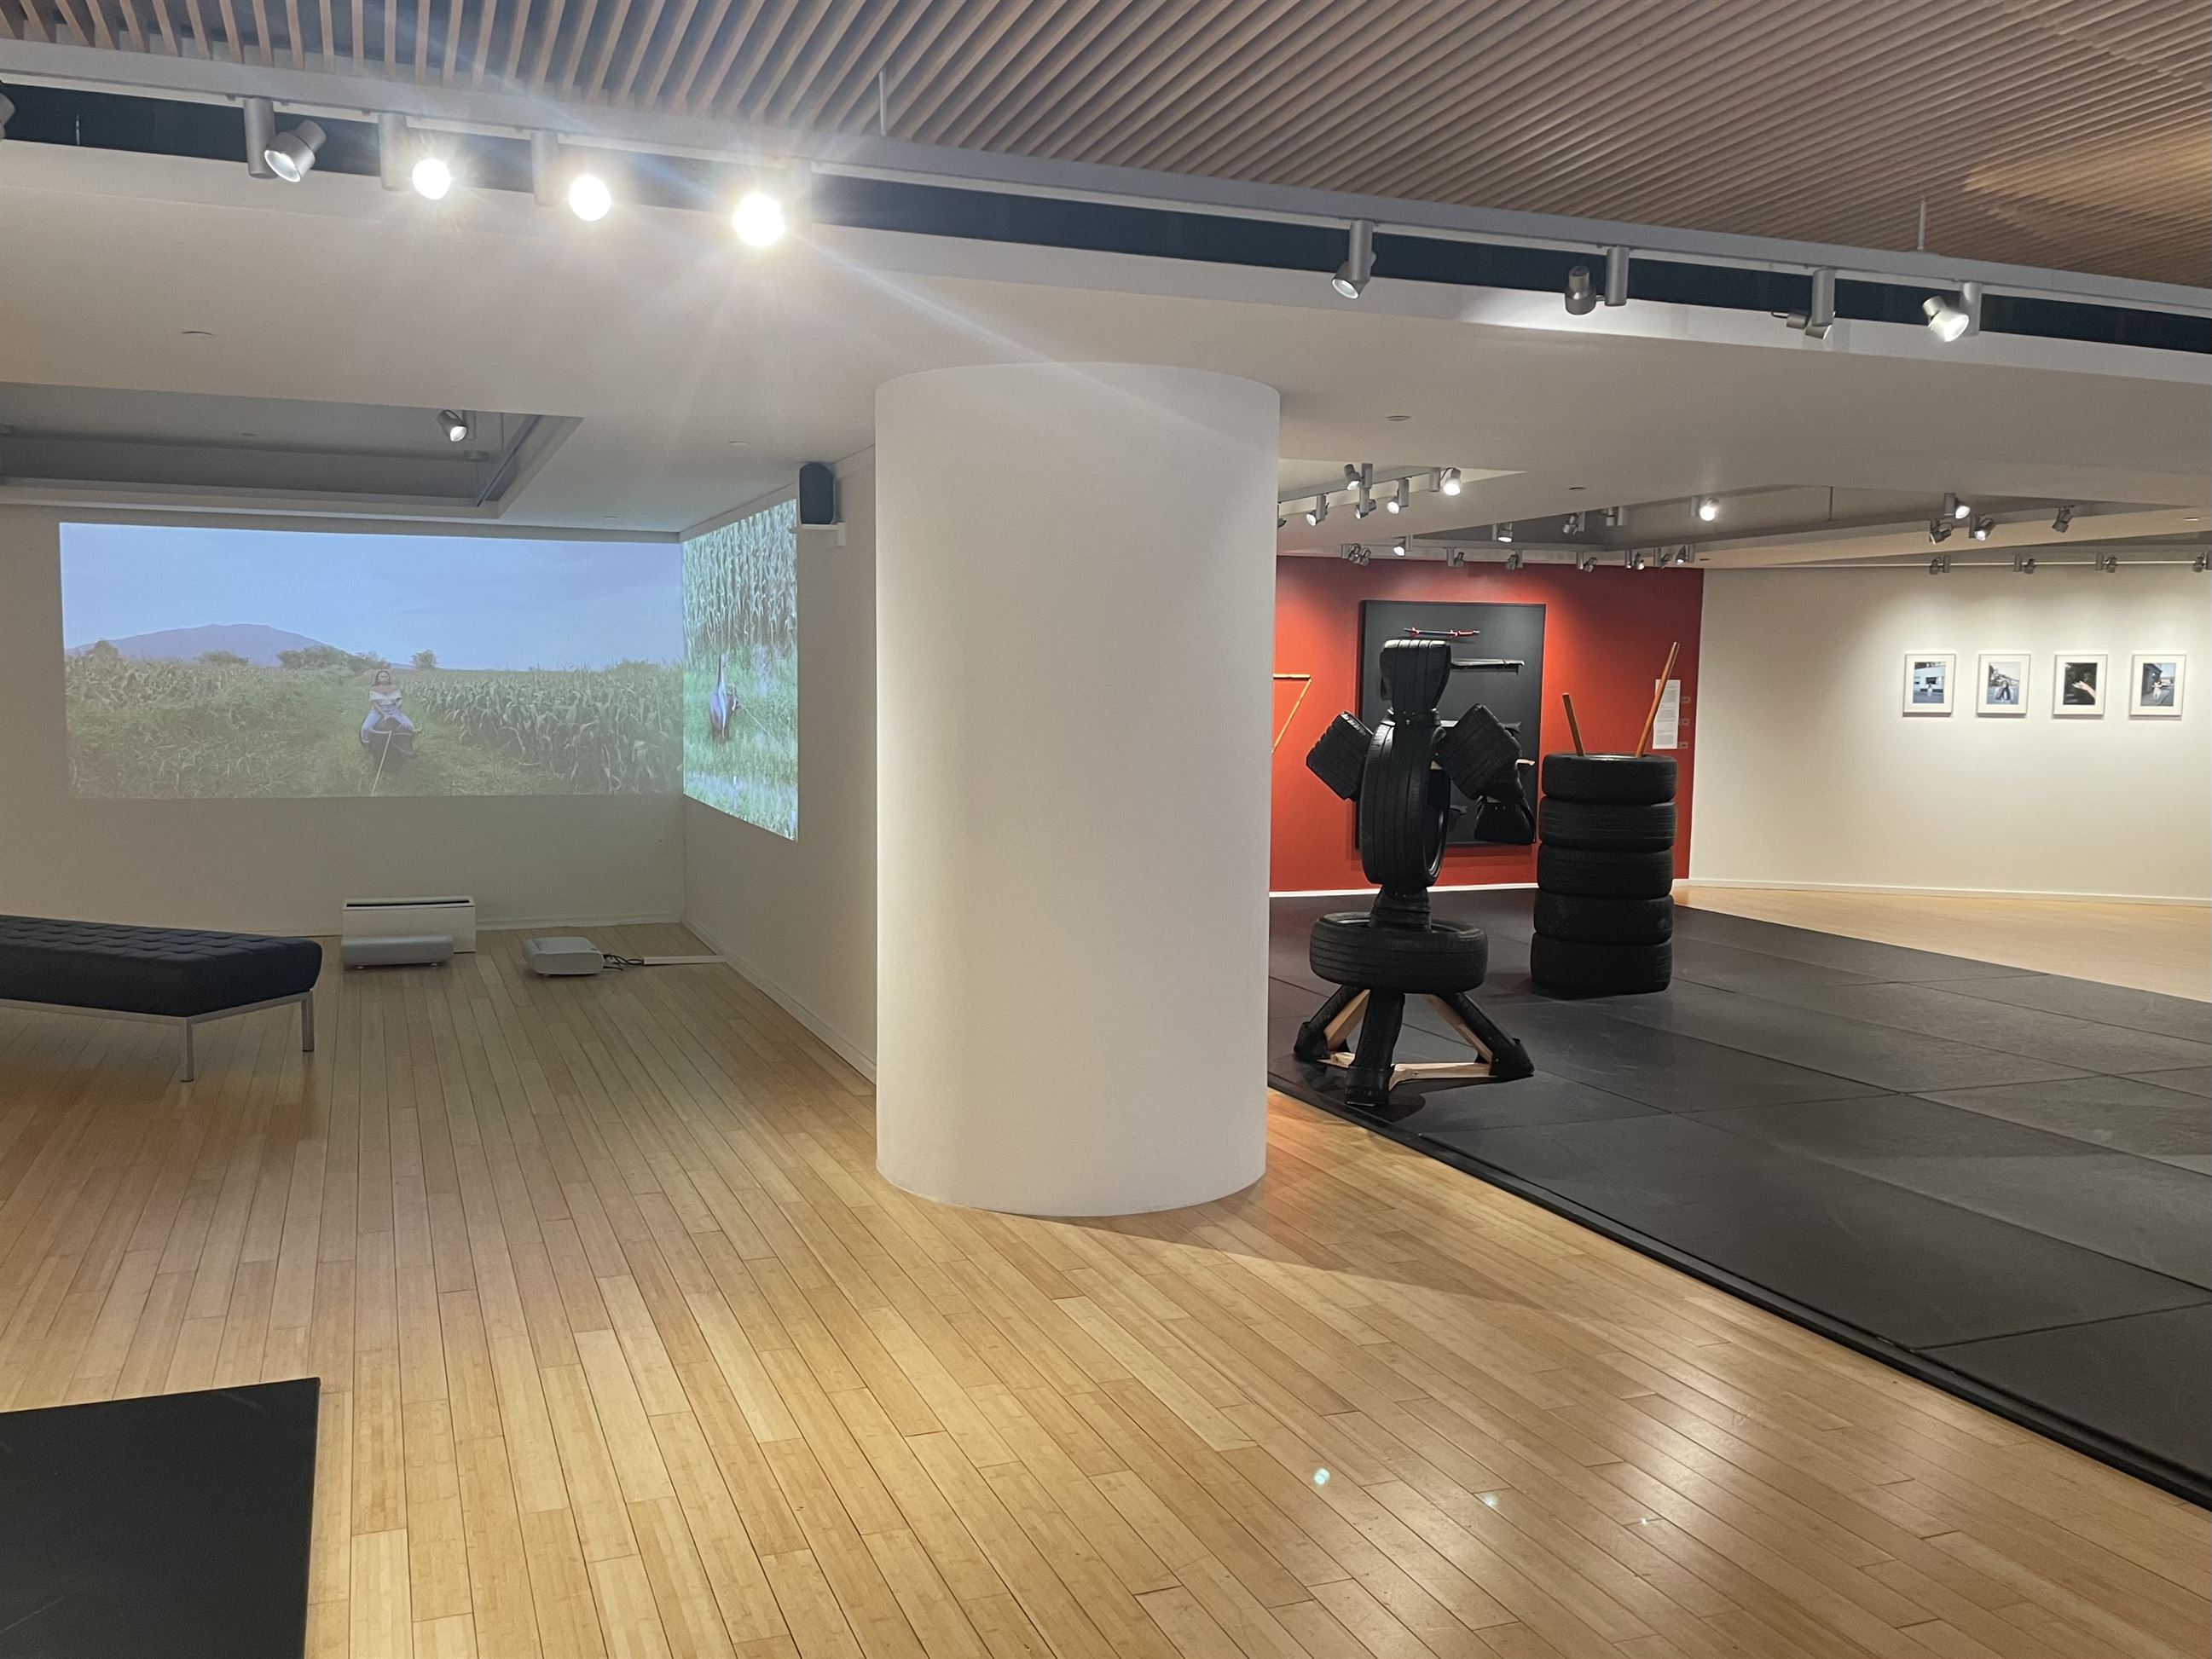 Adjacent to where the art is displayed, there is a martial arts room for viewers to interact with Garcia's work in a physical way.
Scott Ackerson | The Montclarion